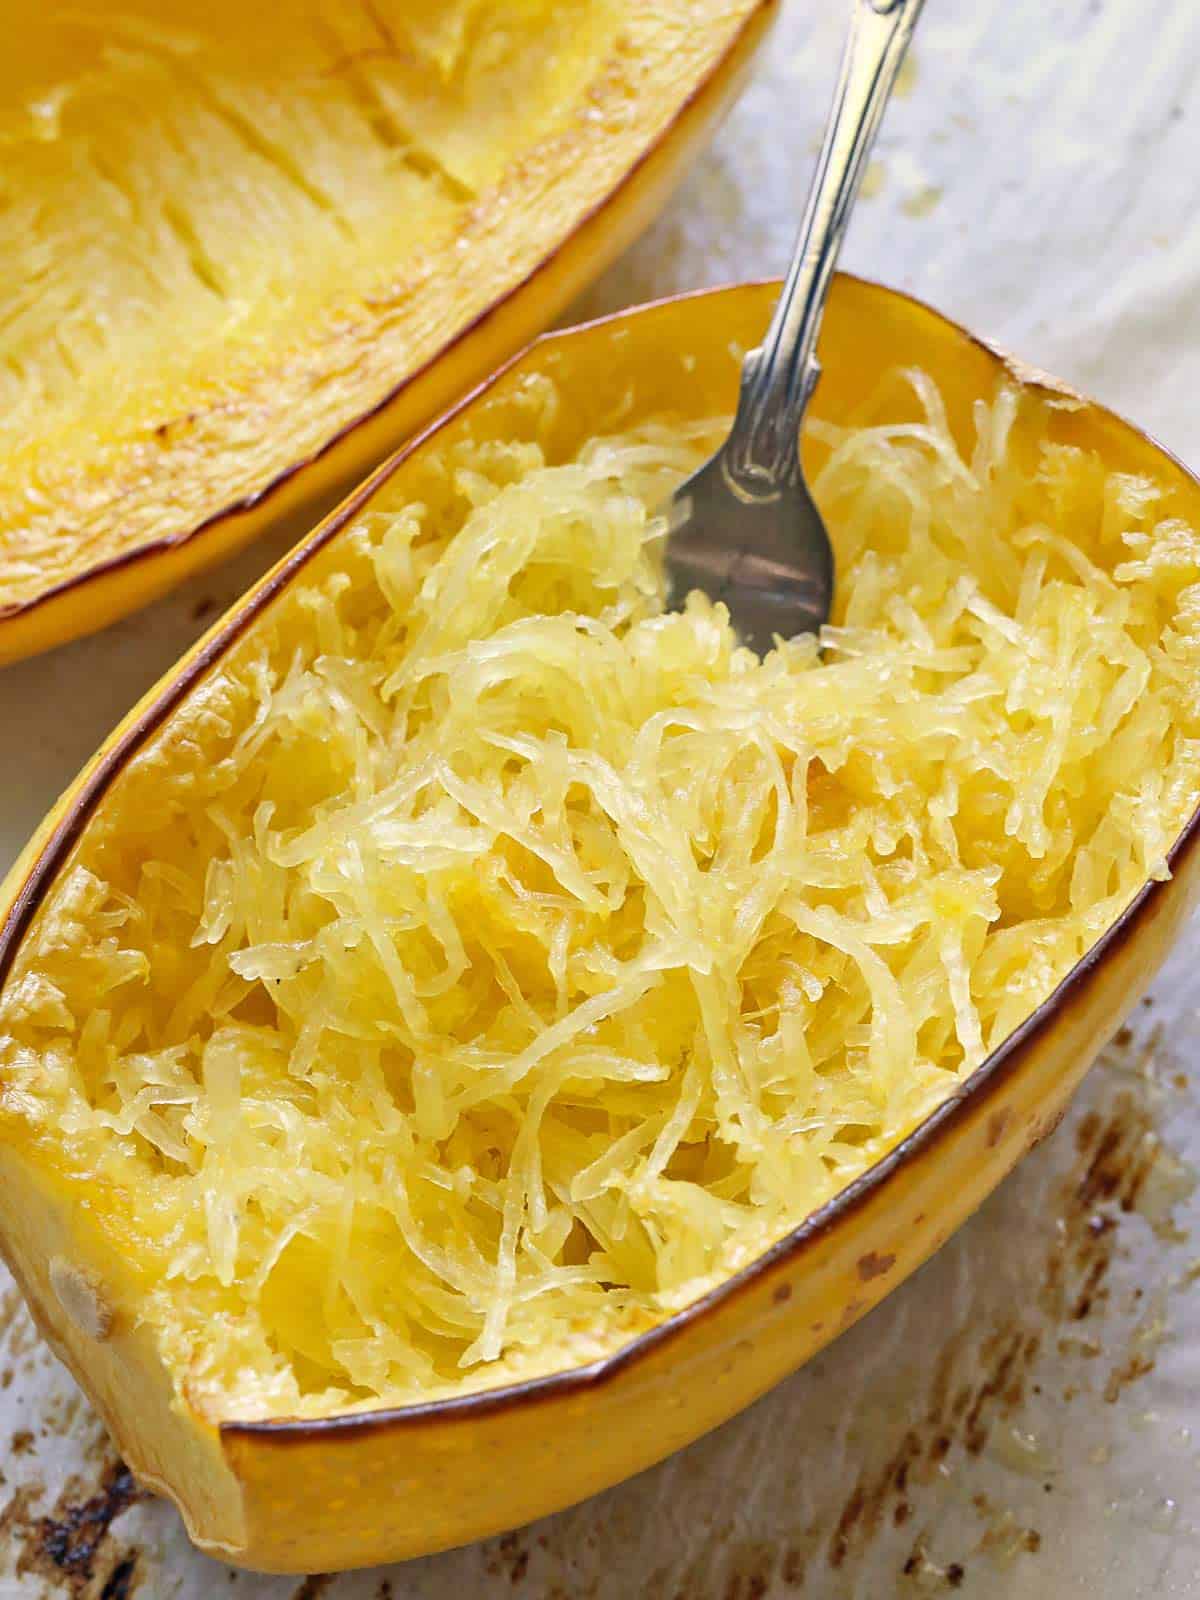 Baked spaghetti squash served on a baking sheet with a fork.  